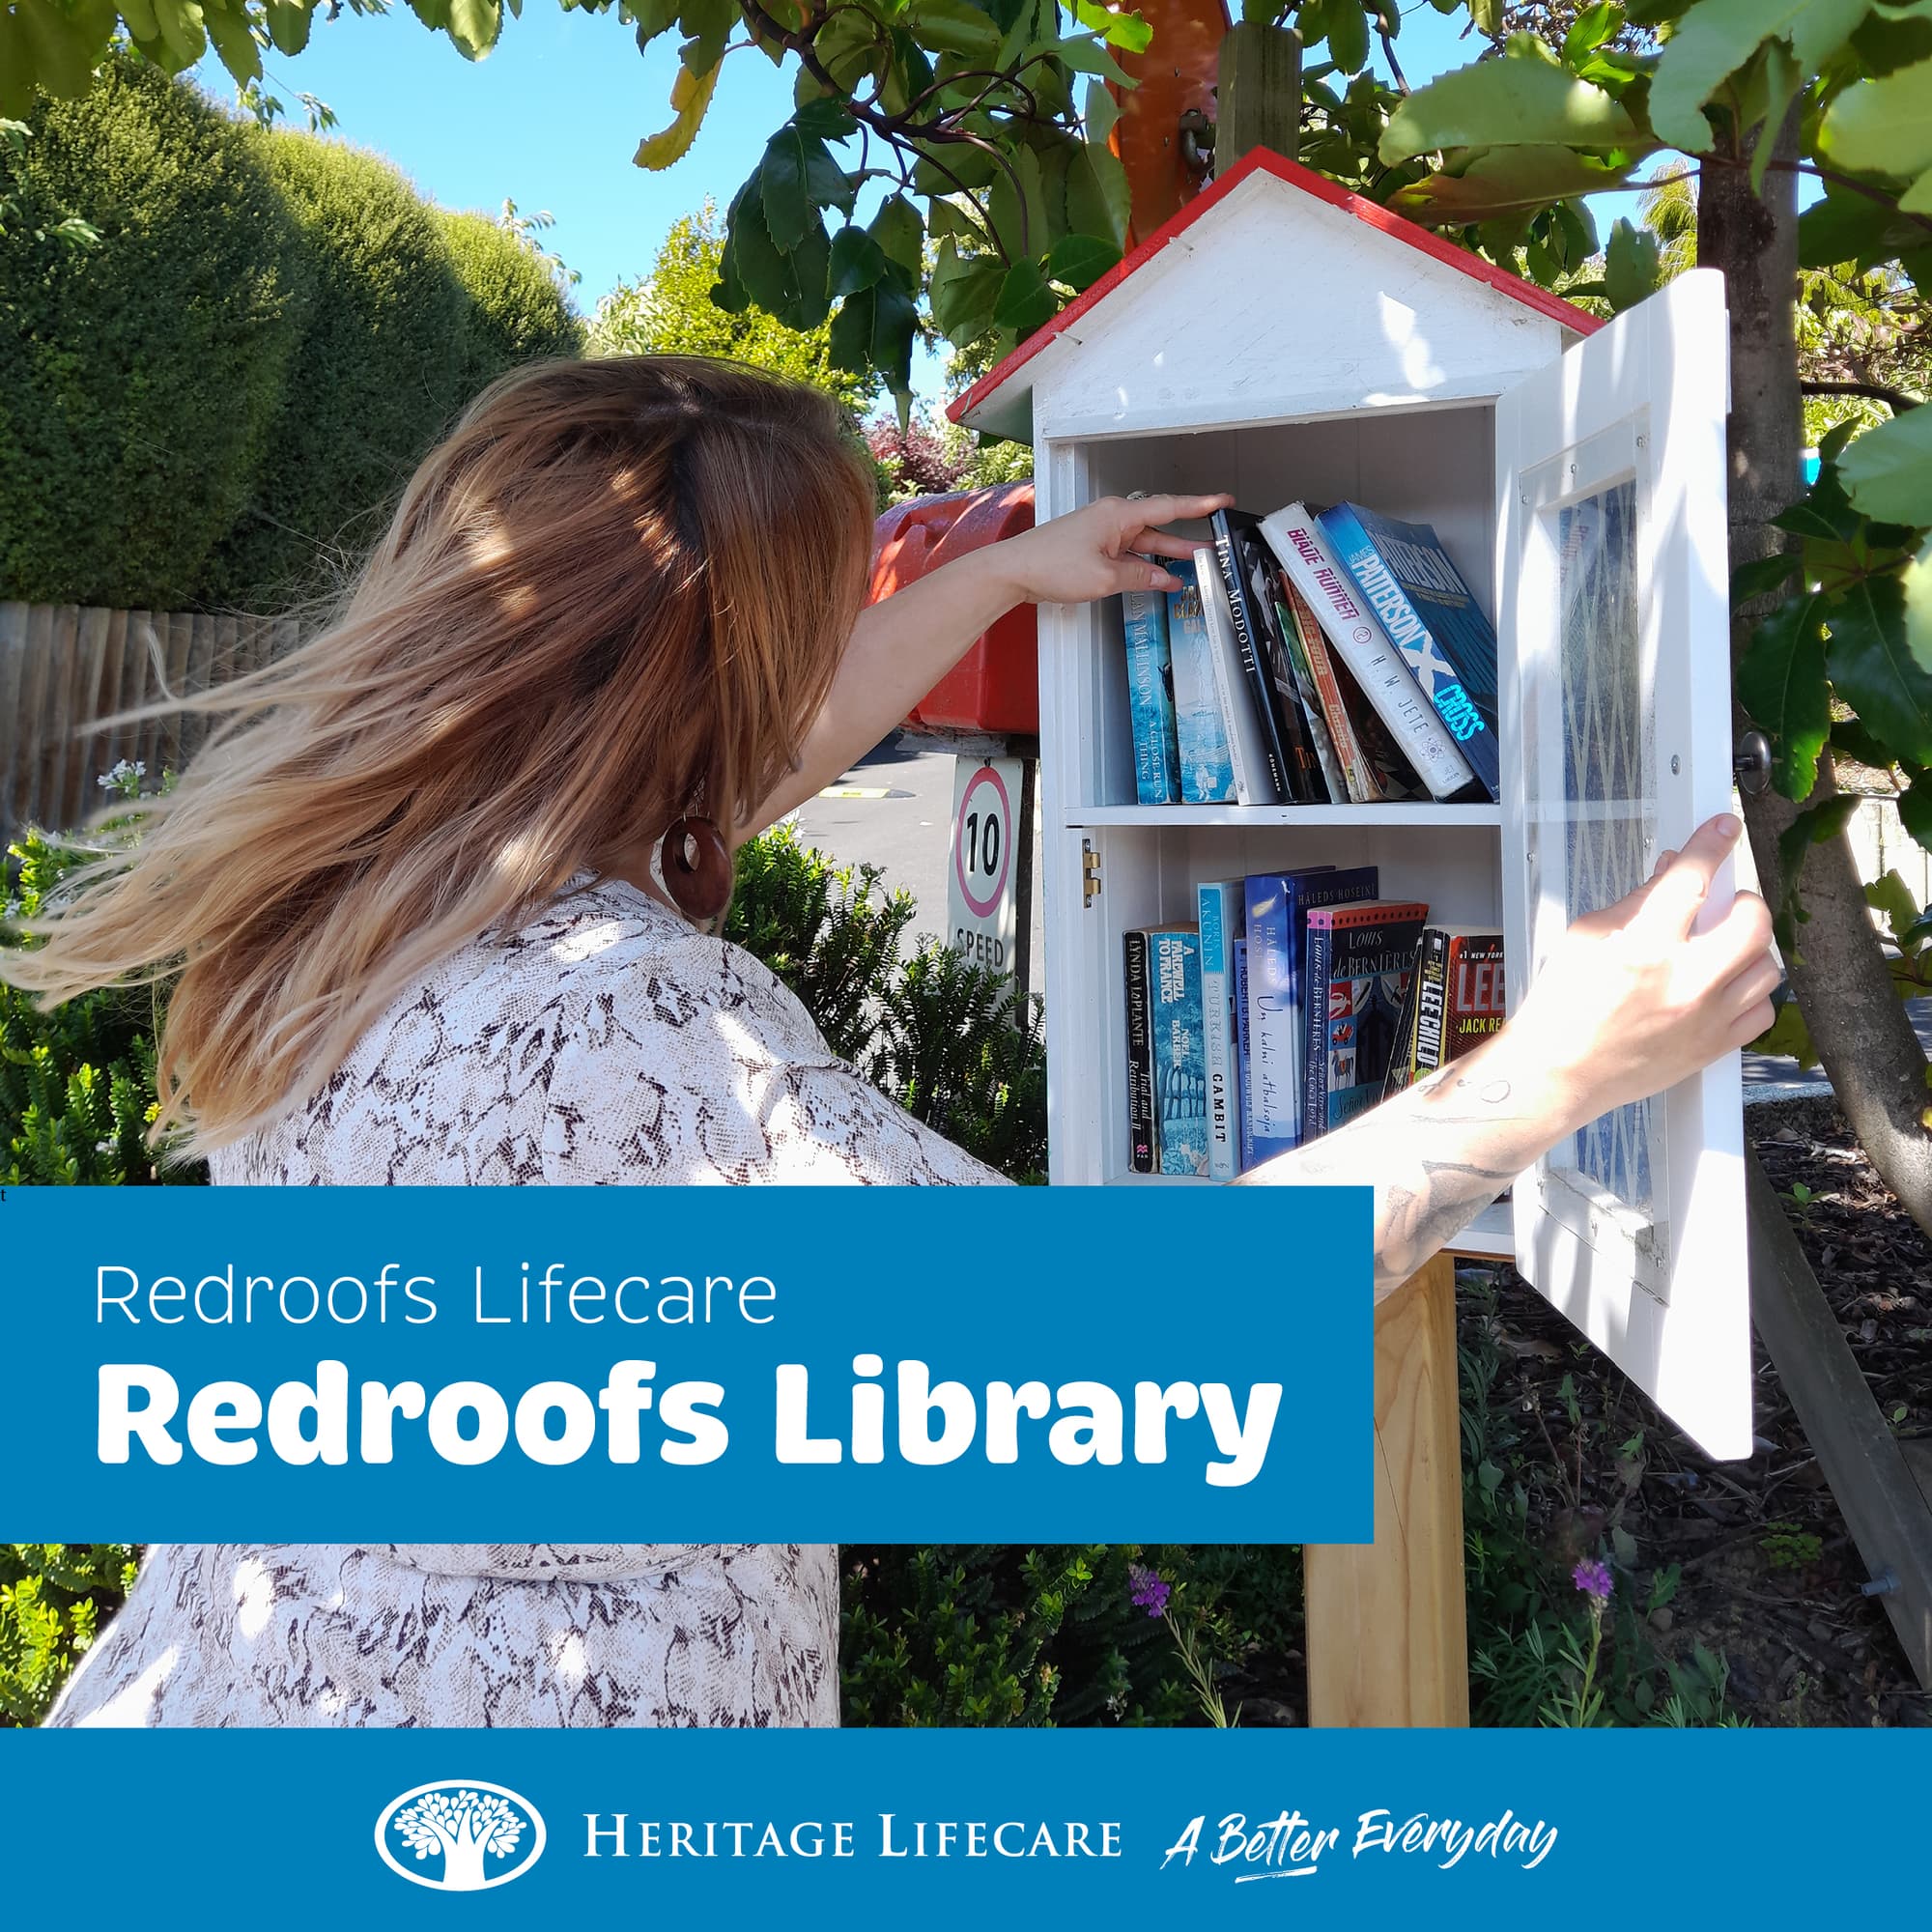 Redroofs little library